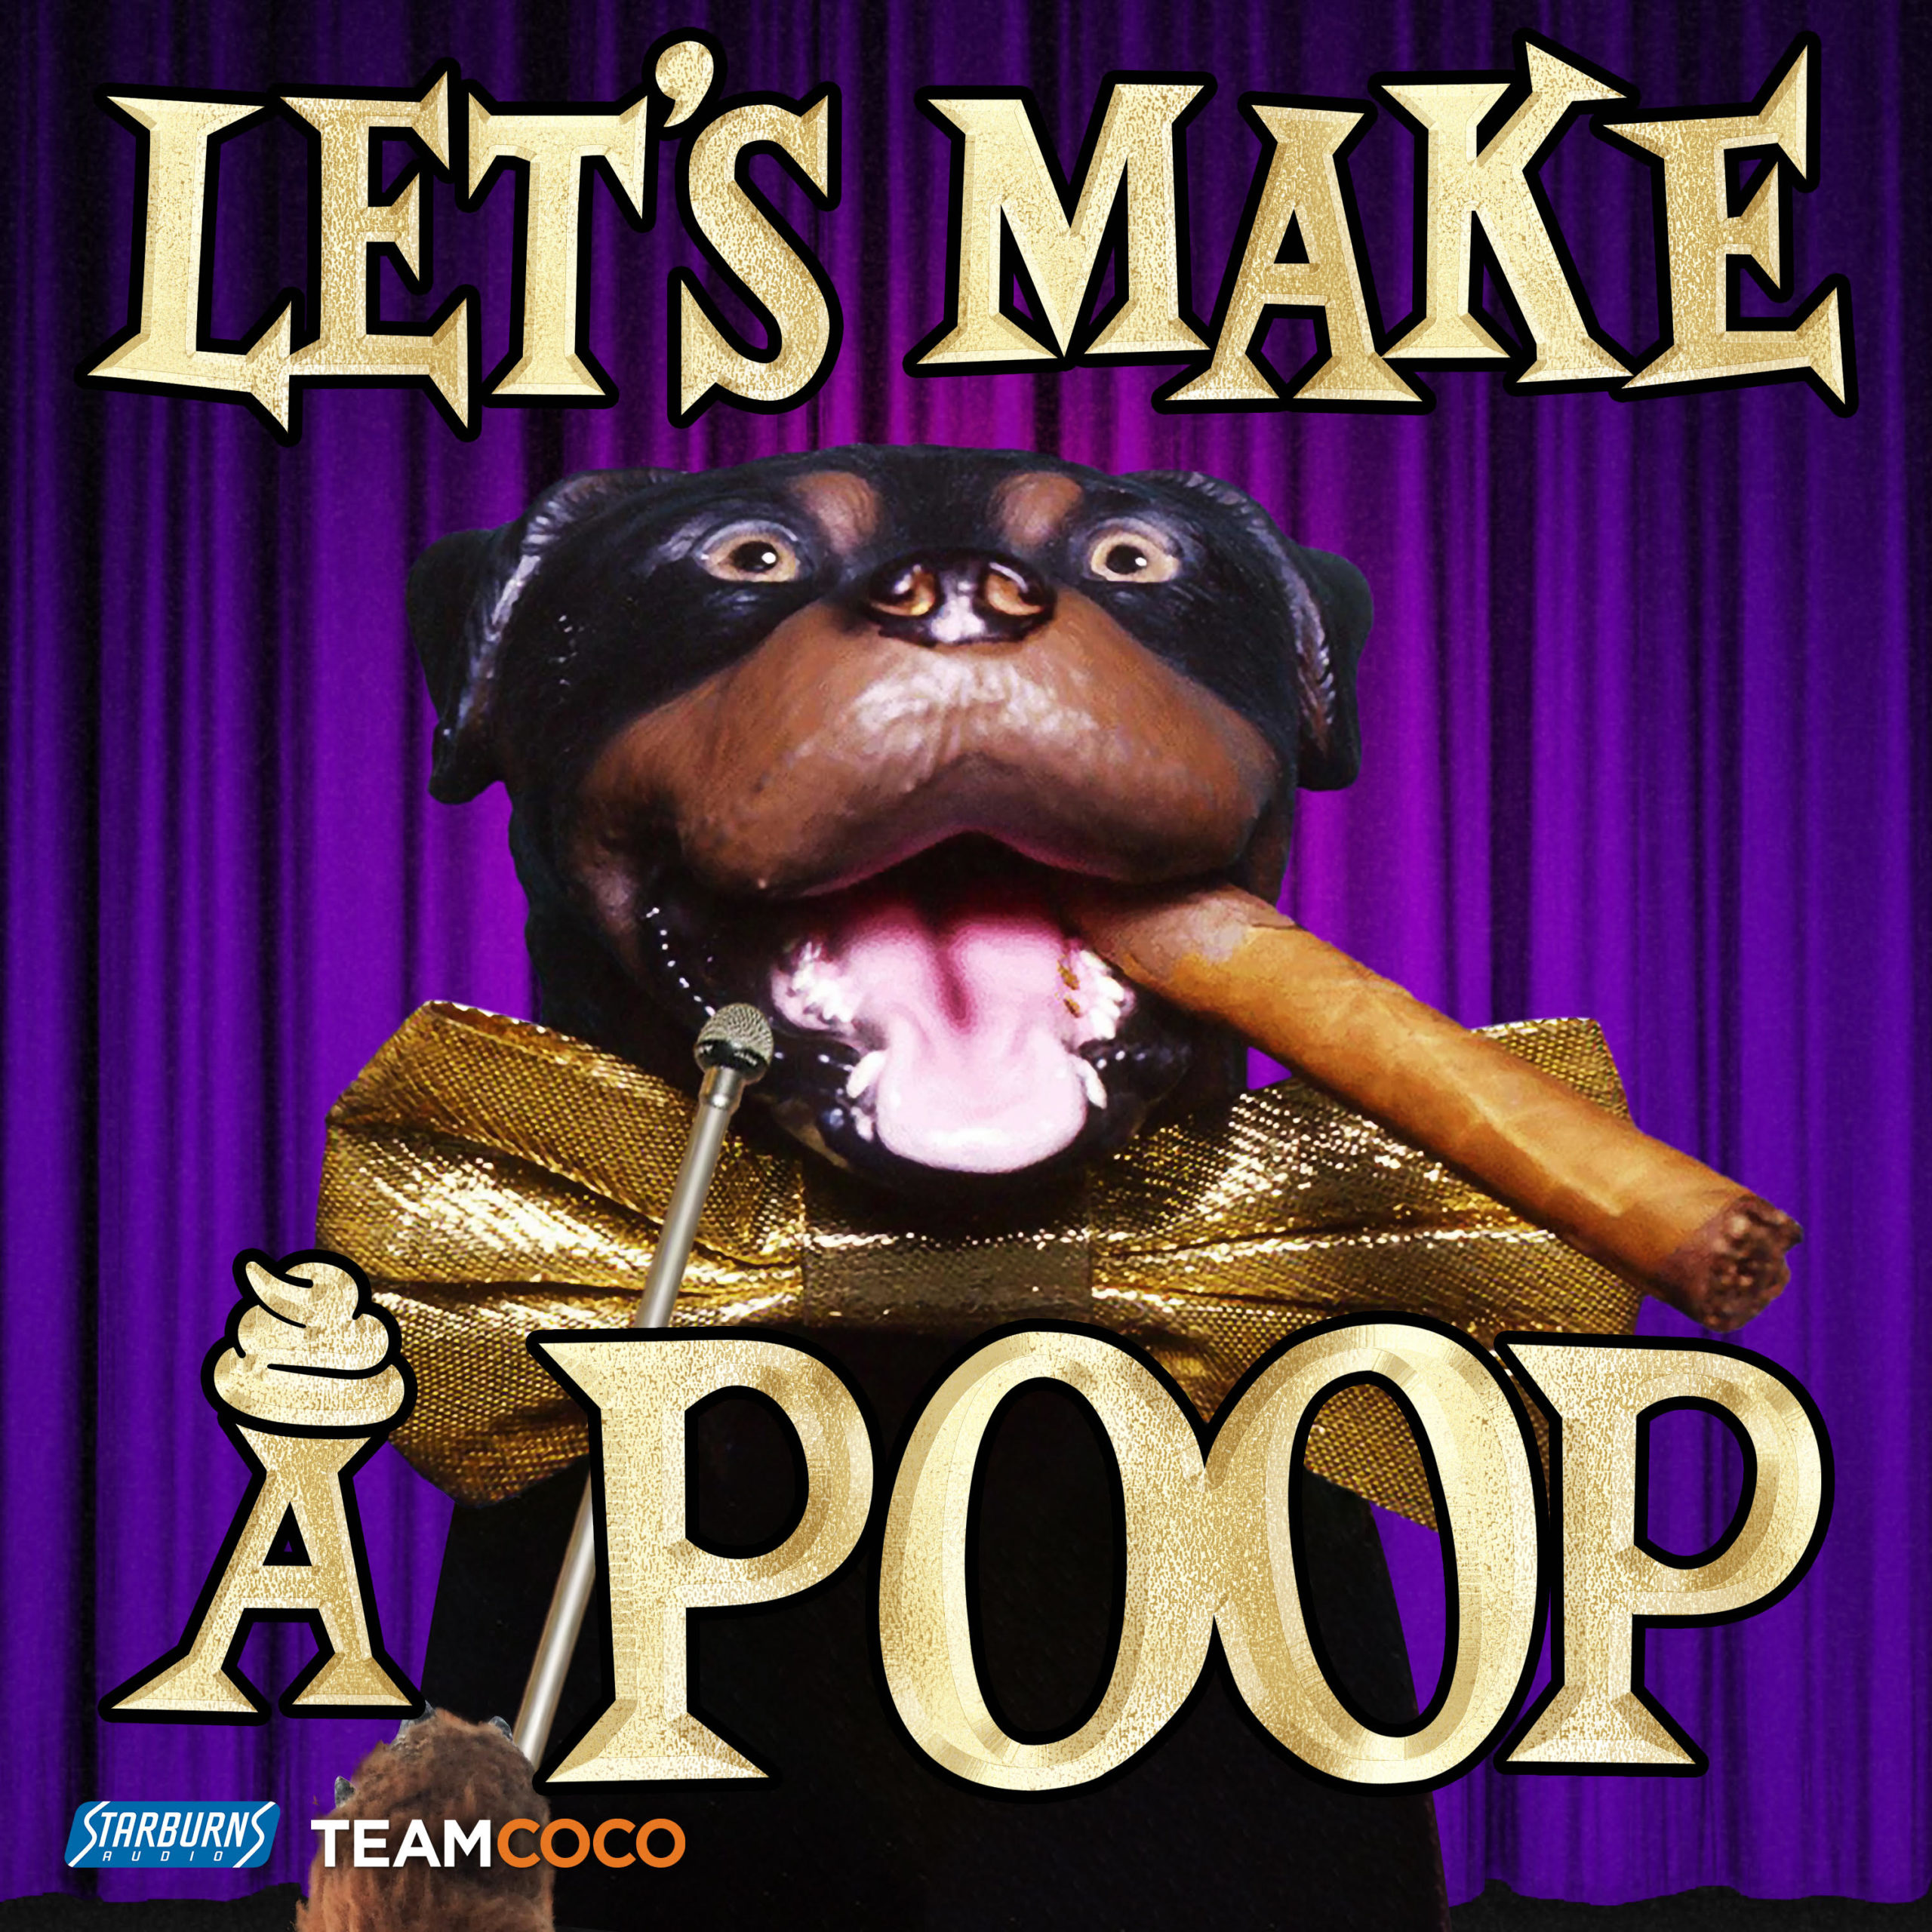 Let's Make a Poop Podcast Cover - Square